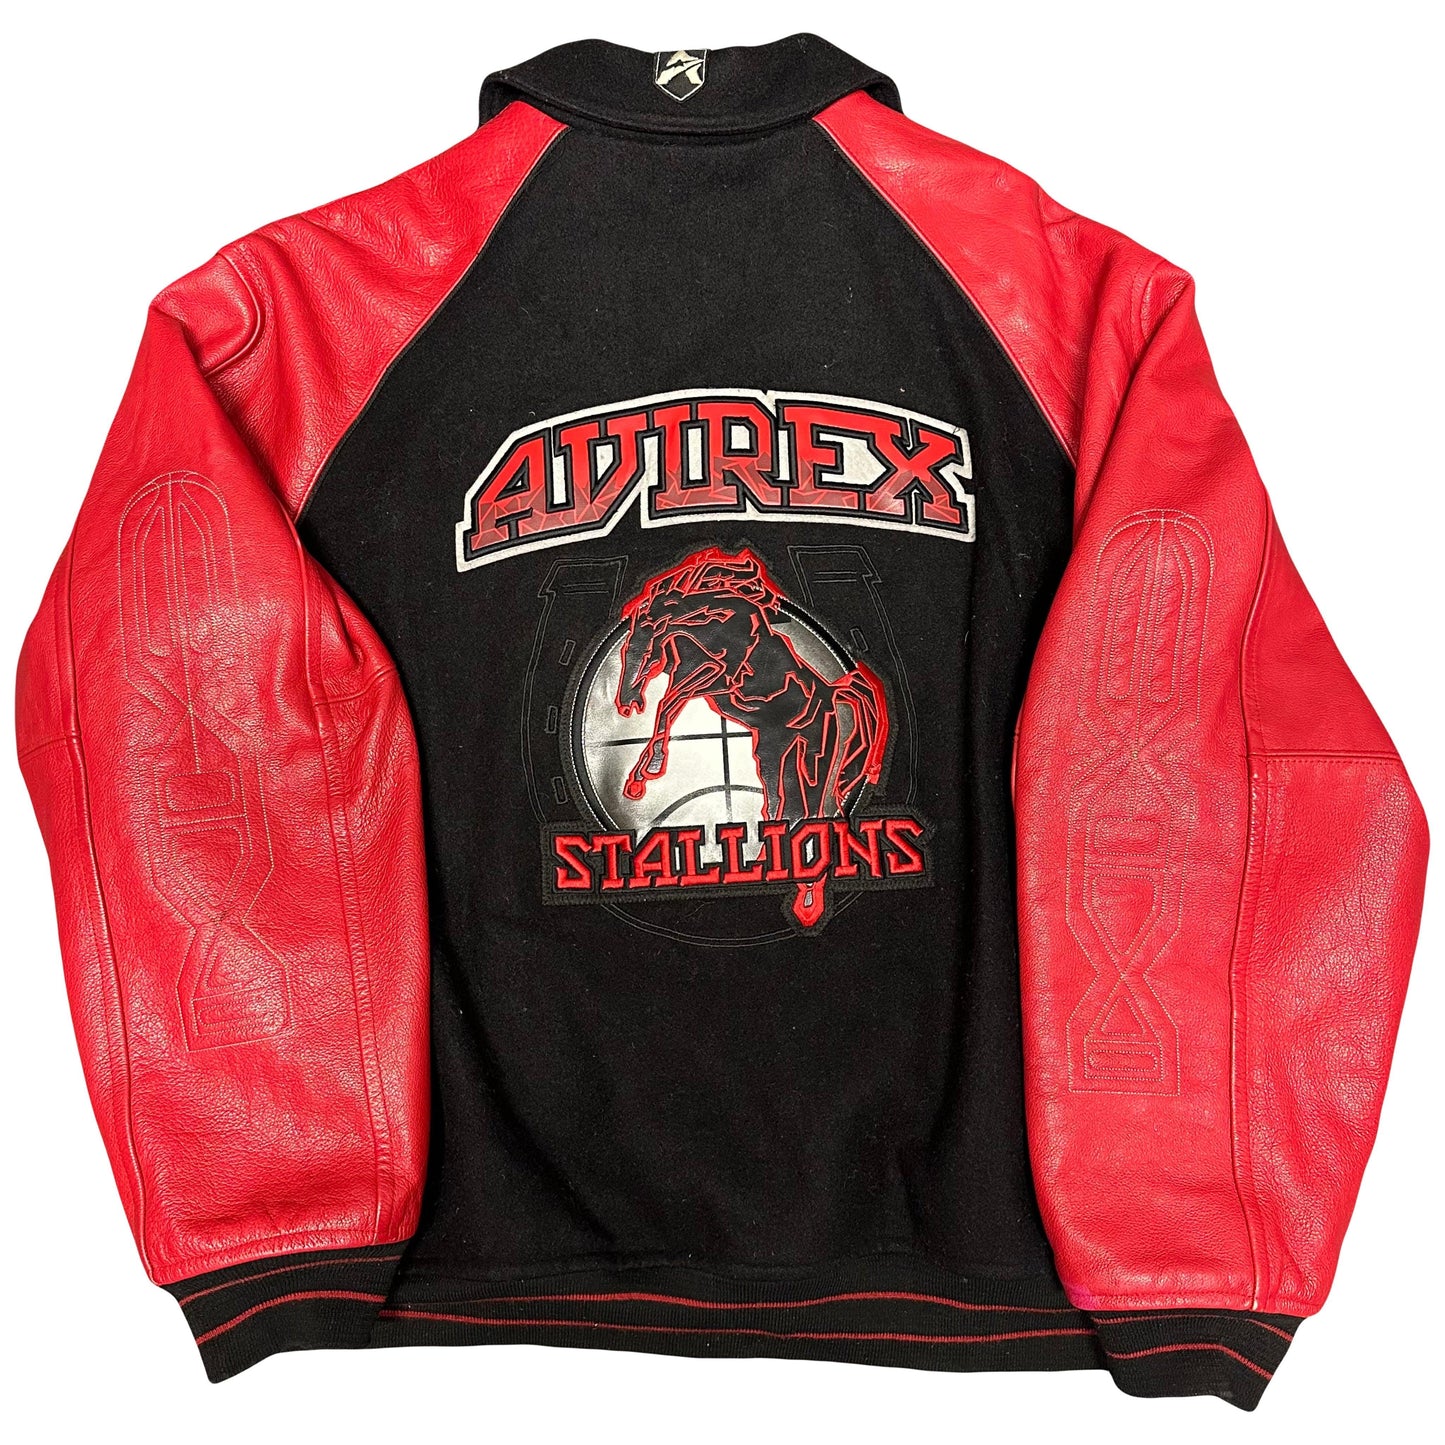 Avirex Stallions Leather & Wool Varsity Jacket In Black & Red ( XXL ) - Known Source